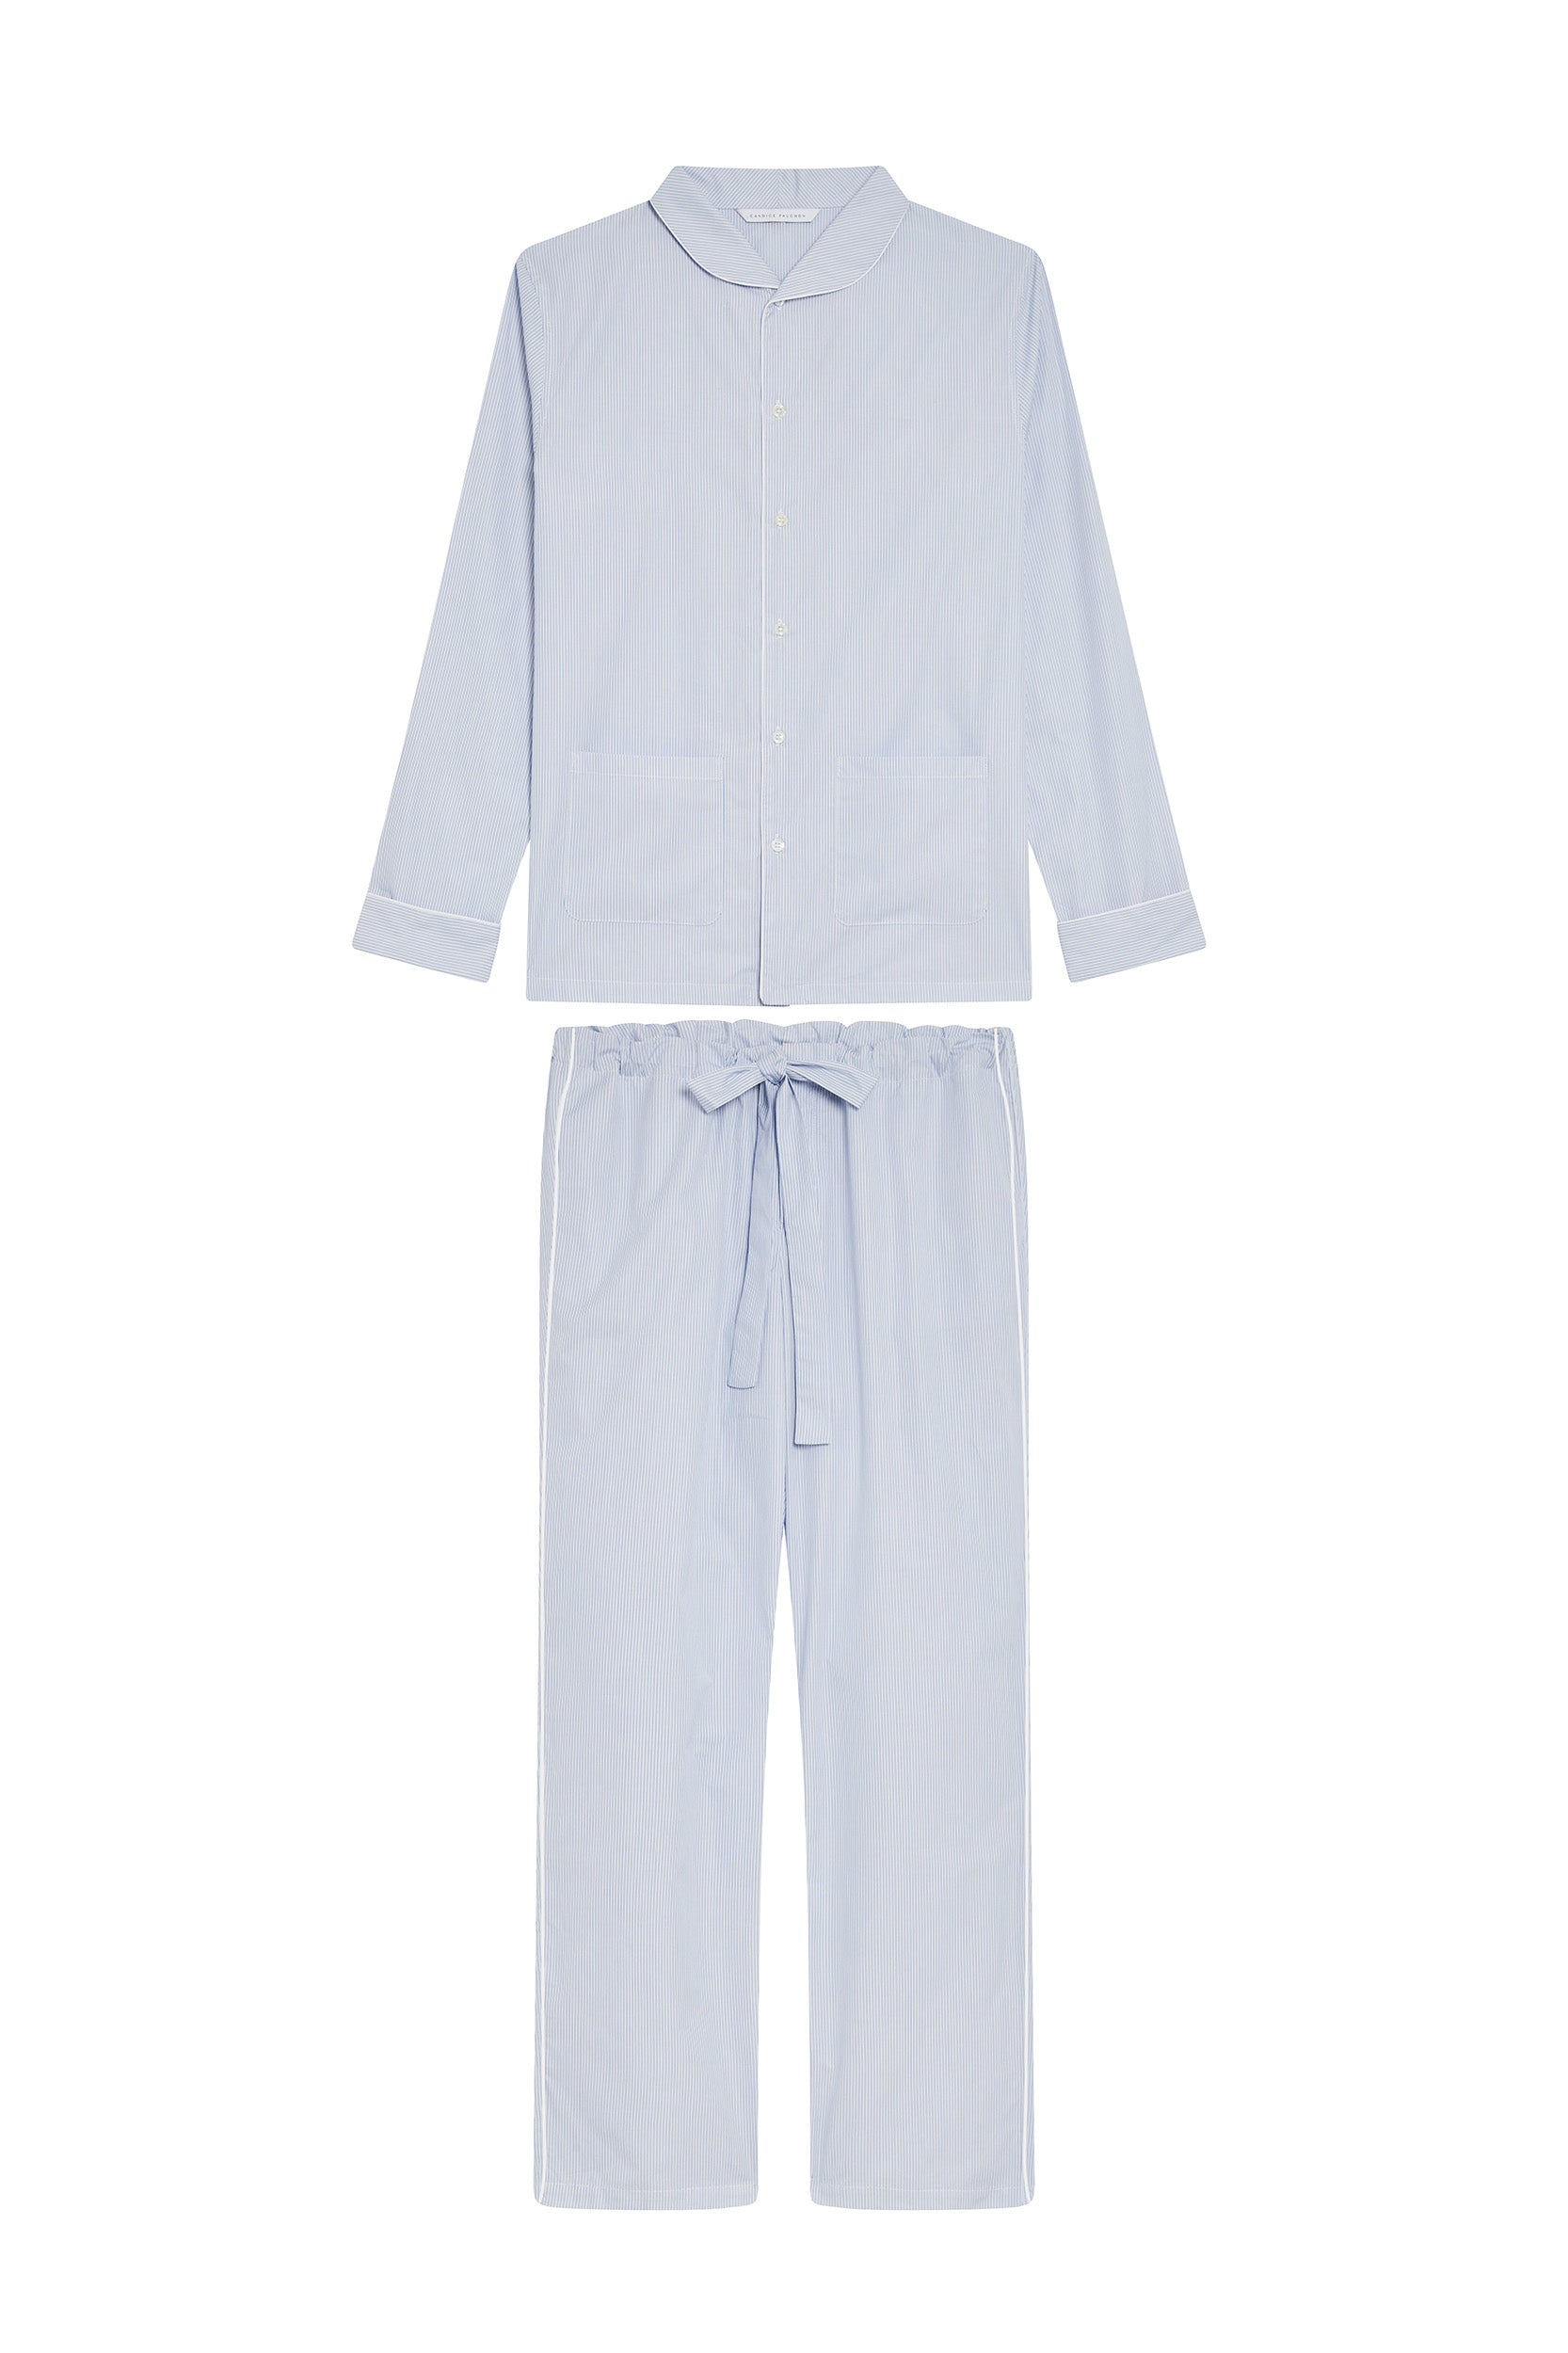 The Waldorf in white cotton broadcloth with thin blue stripes